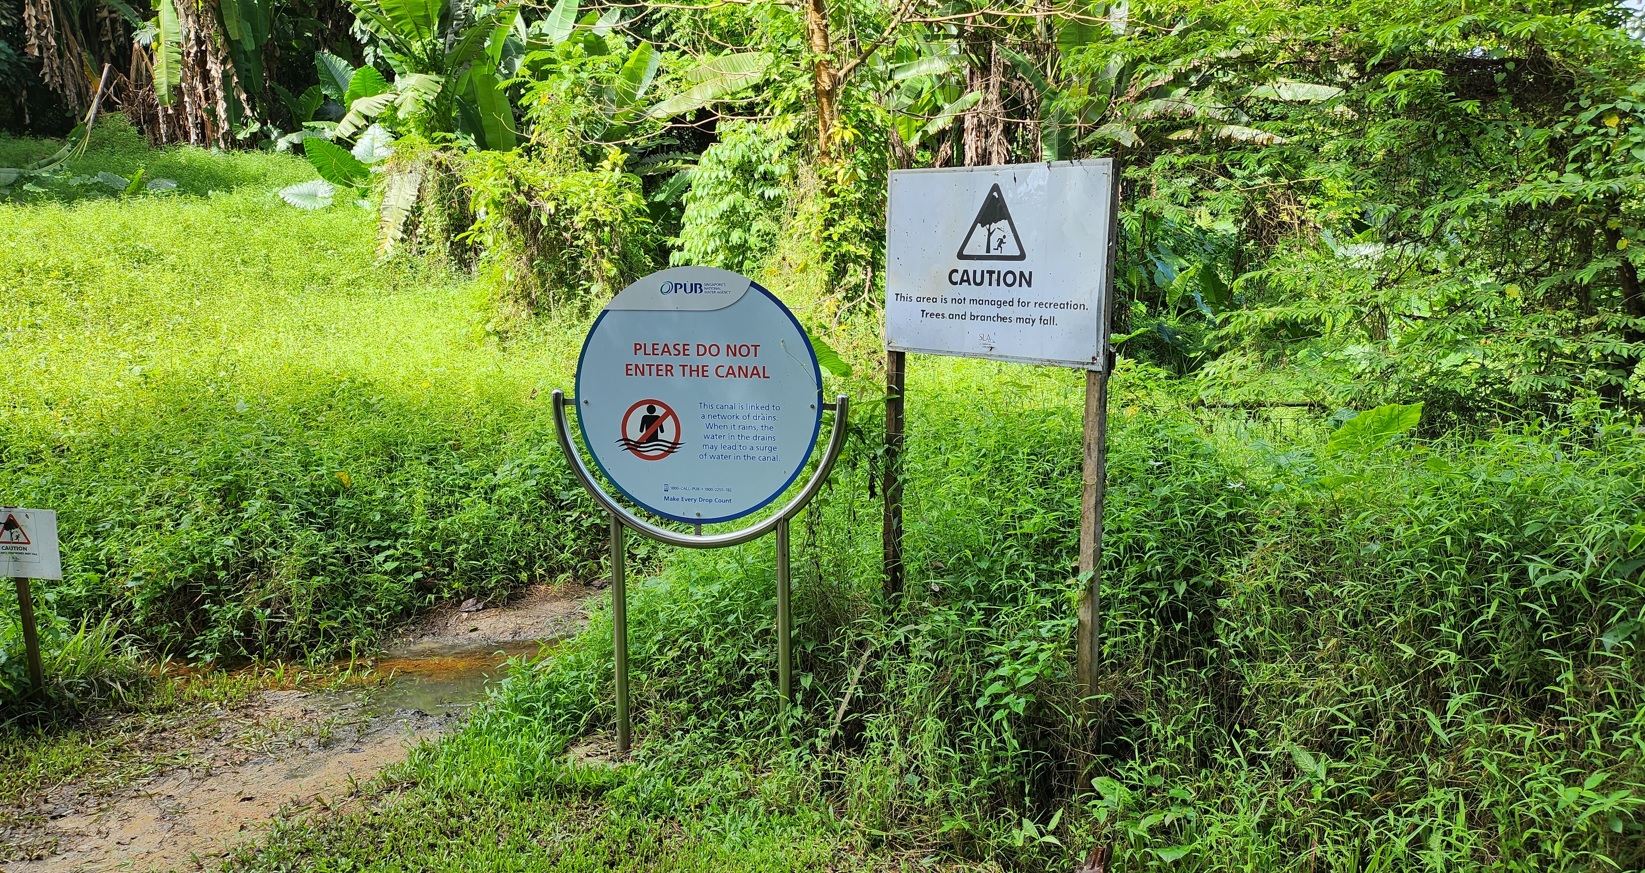 Warning sign at Clementi forest